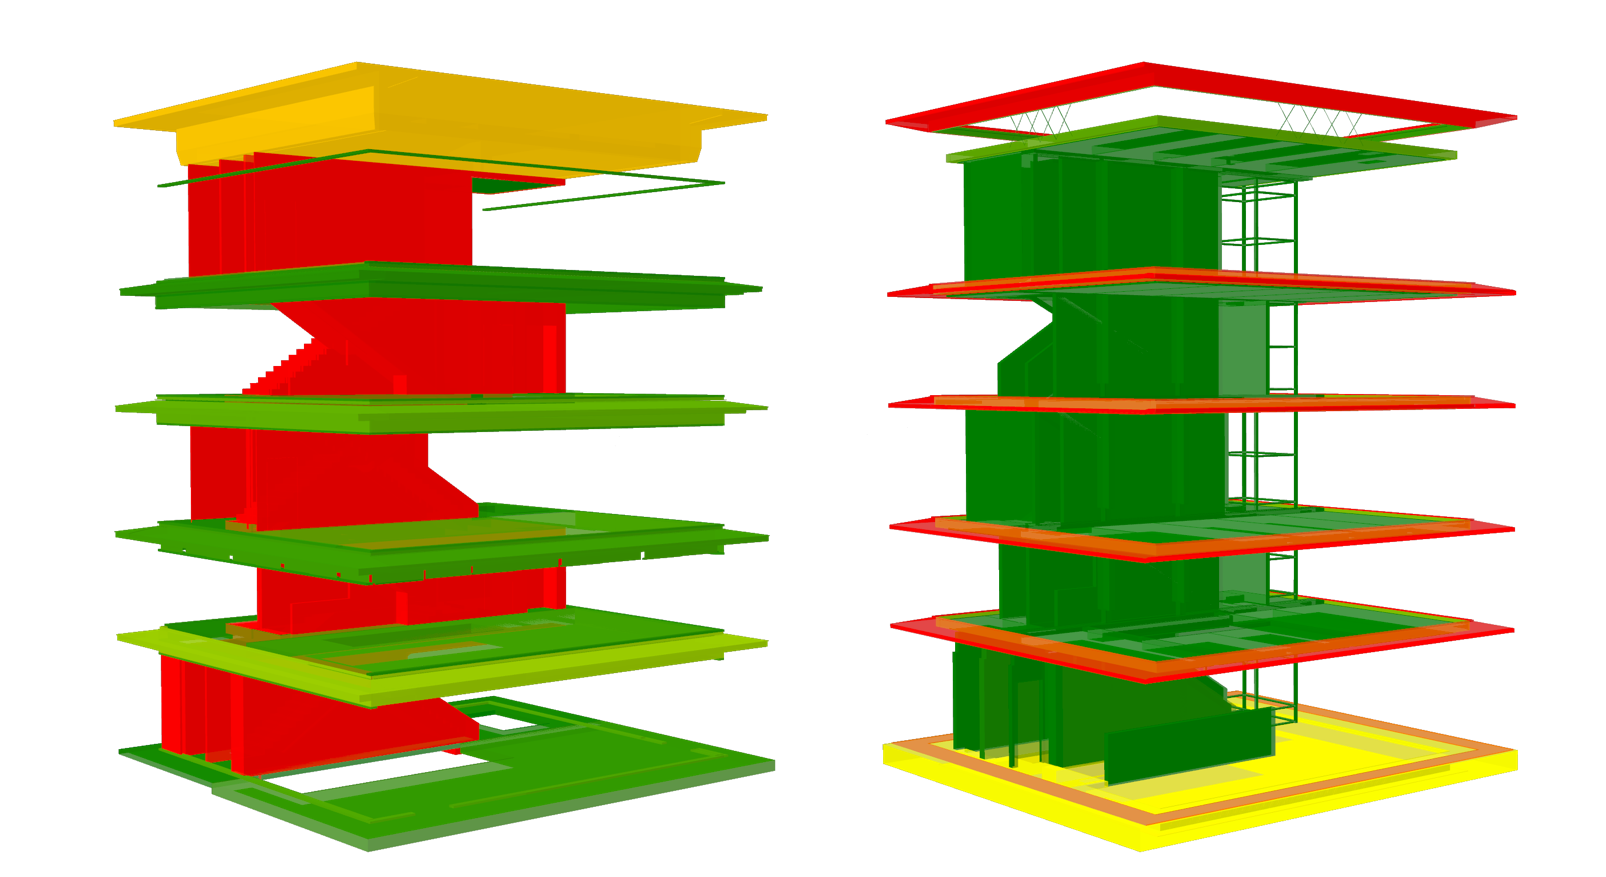 Comparing modes: RC reference model (left), the optimised model with CLT slabs and walls (right)